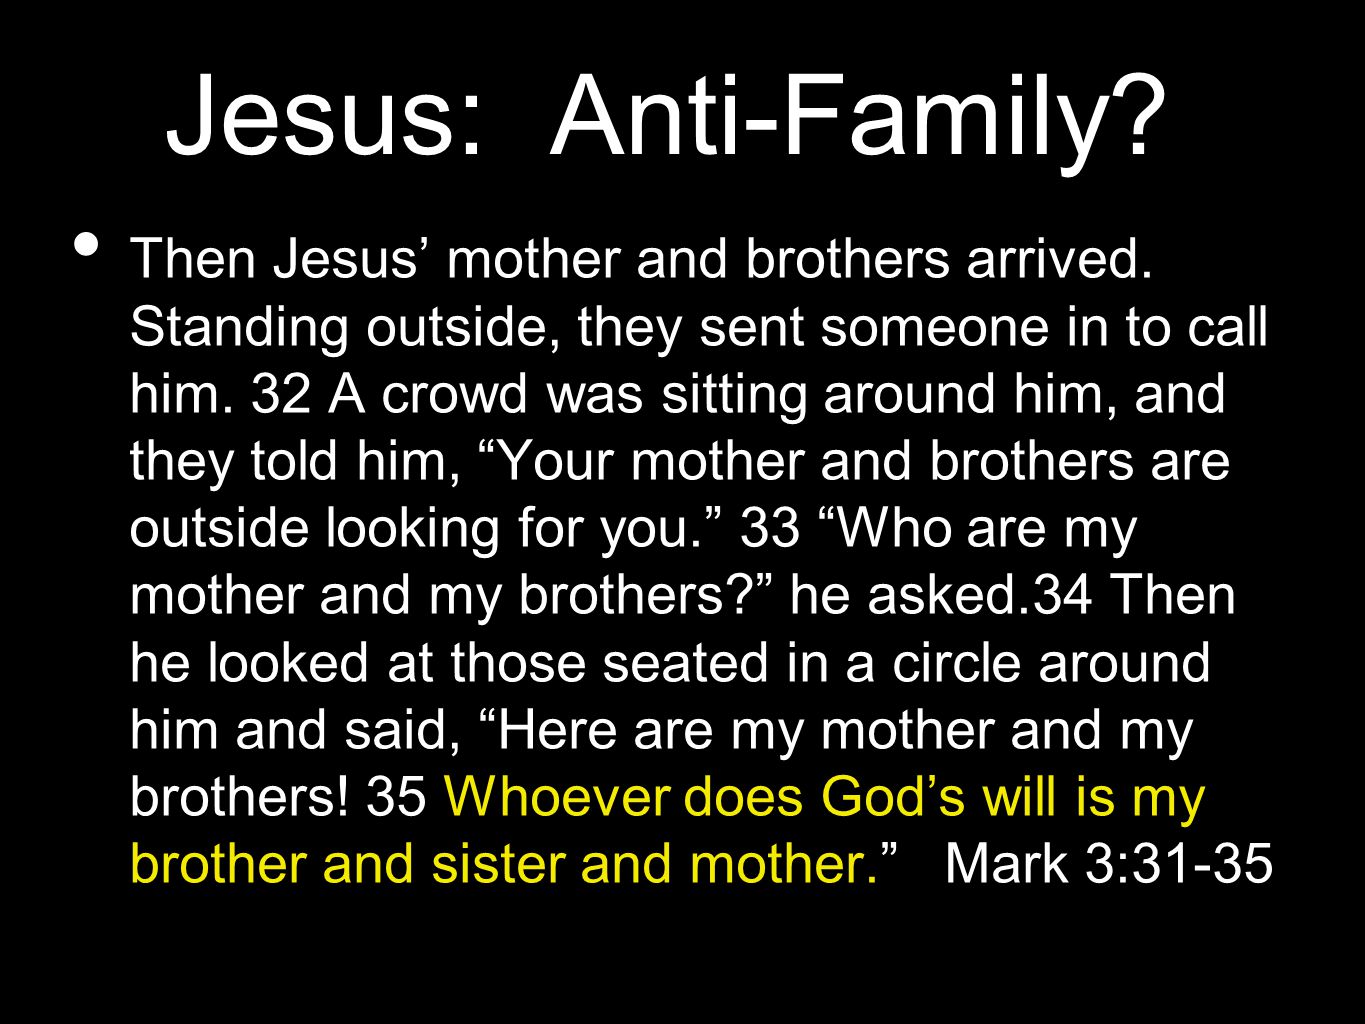 Jesus: Anti-Family. Then Jesus’ mother and brothers arrived.